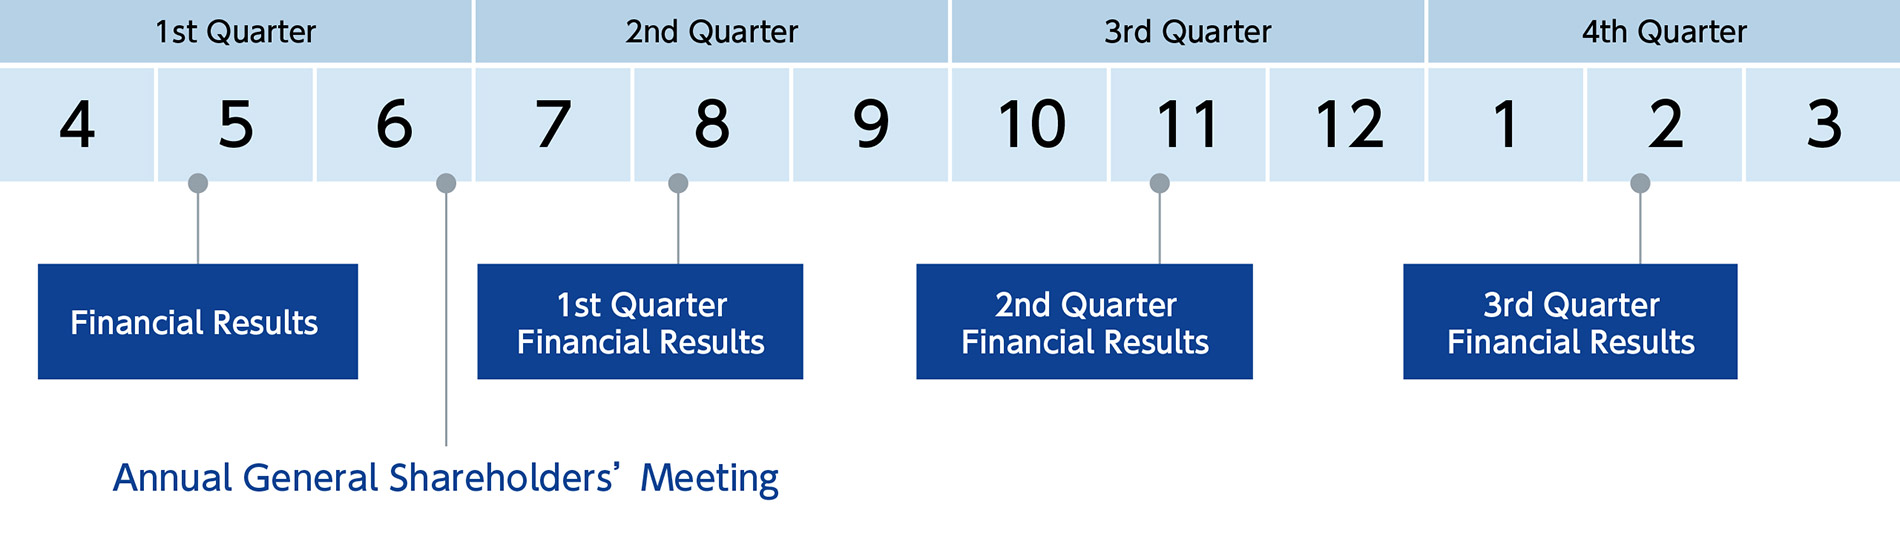 The 1st quarter financial results are released in August, the 2nd quarter financial results in November, the 3rd quarter financial results in February, and the overall financial results are released in May. The Annual General Shareholders' Meeting is held in June.